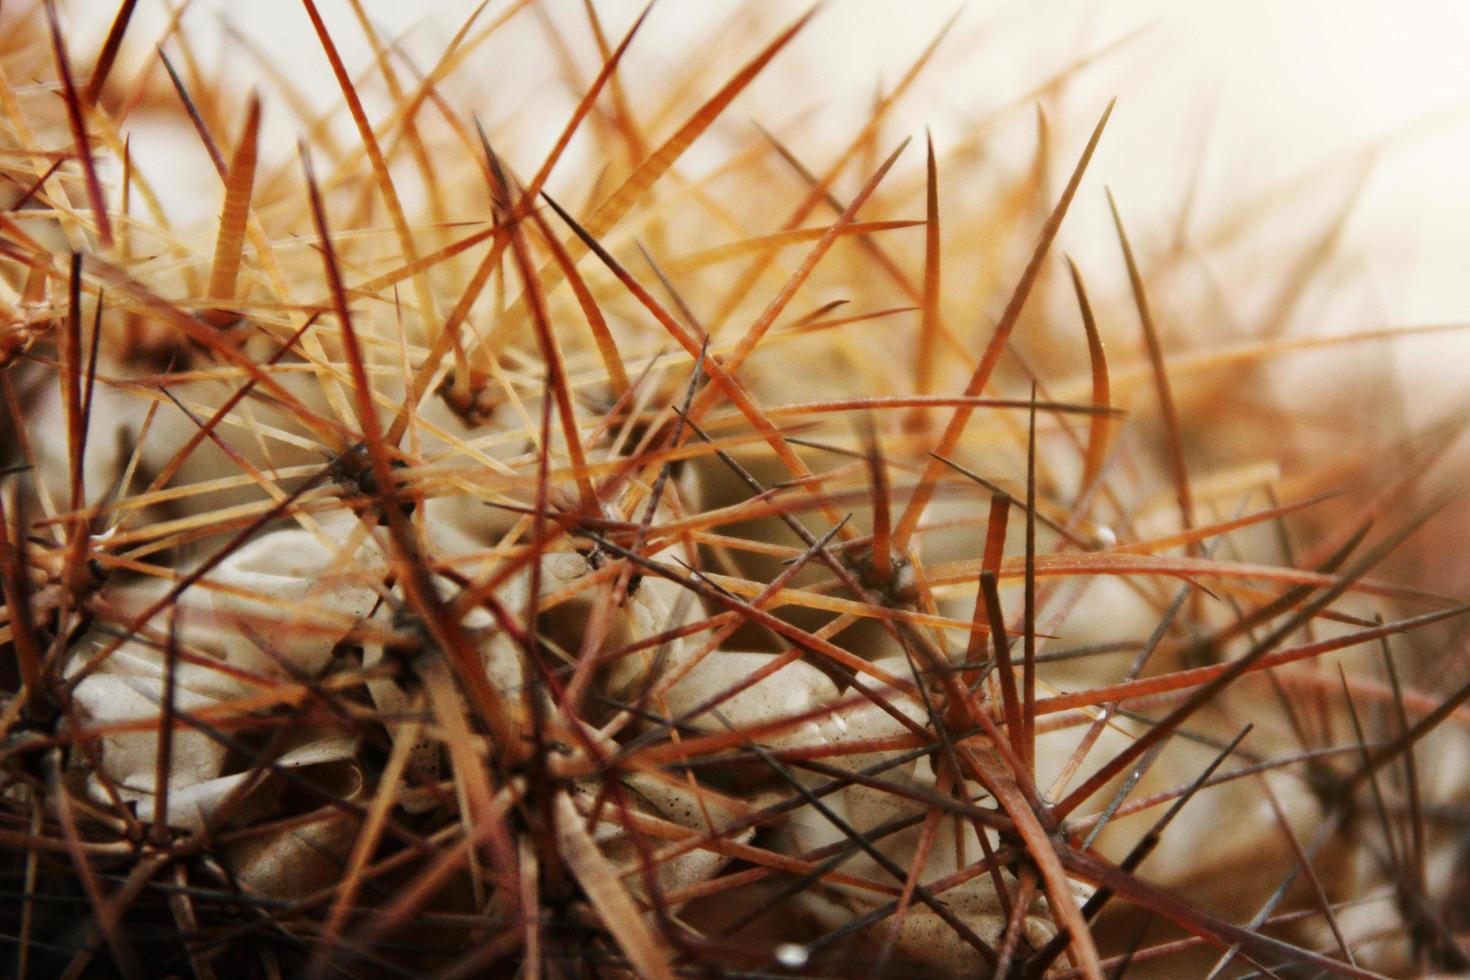 Closed up thorn of dry cactus background photo